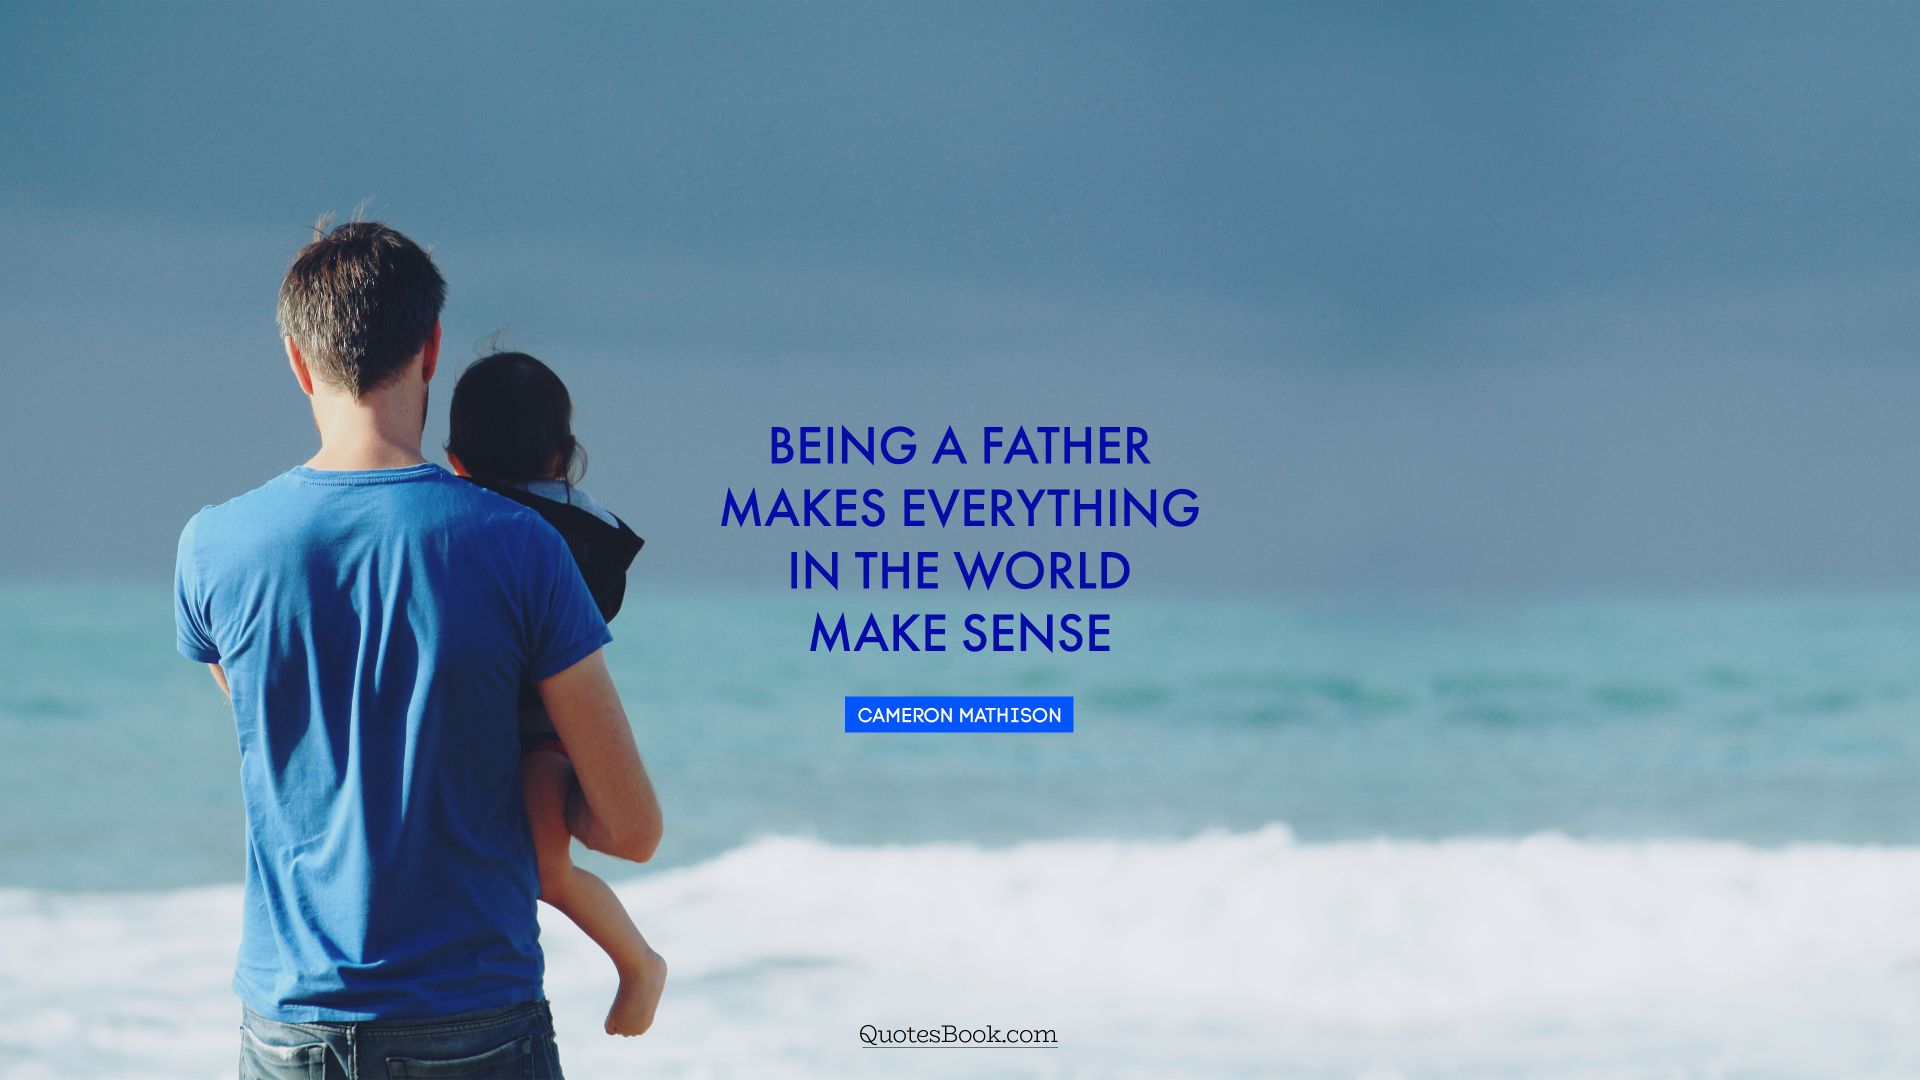 Being a father makes everything in the world make sense. - Quote by Cameron Mathison